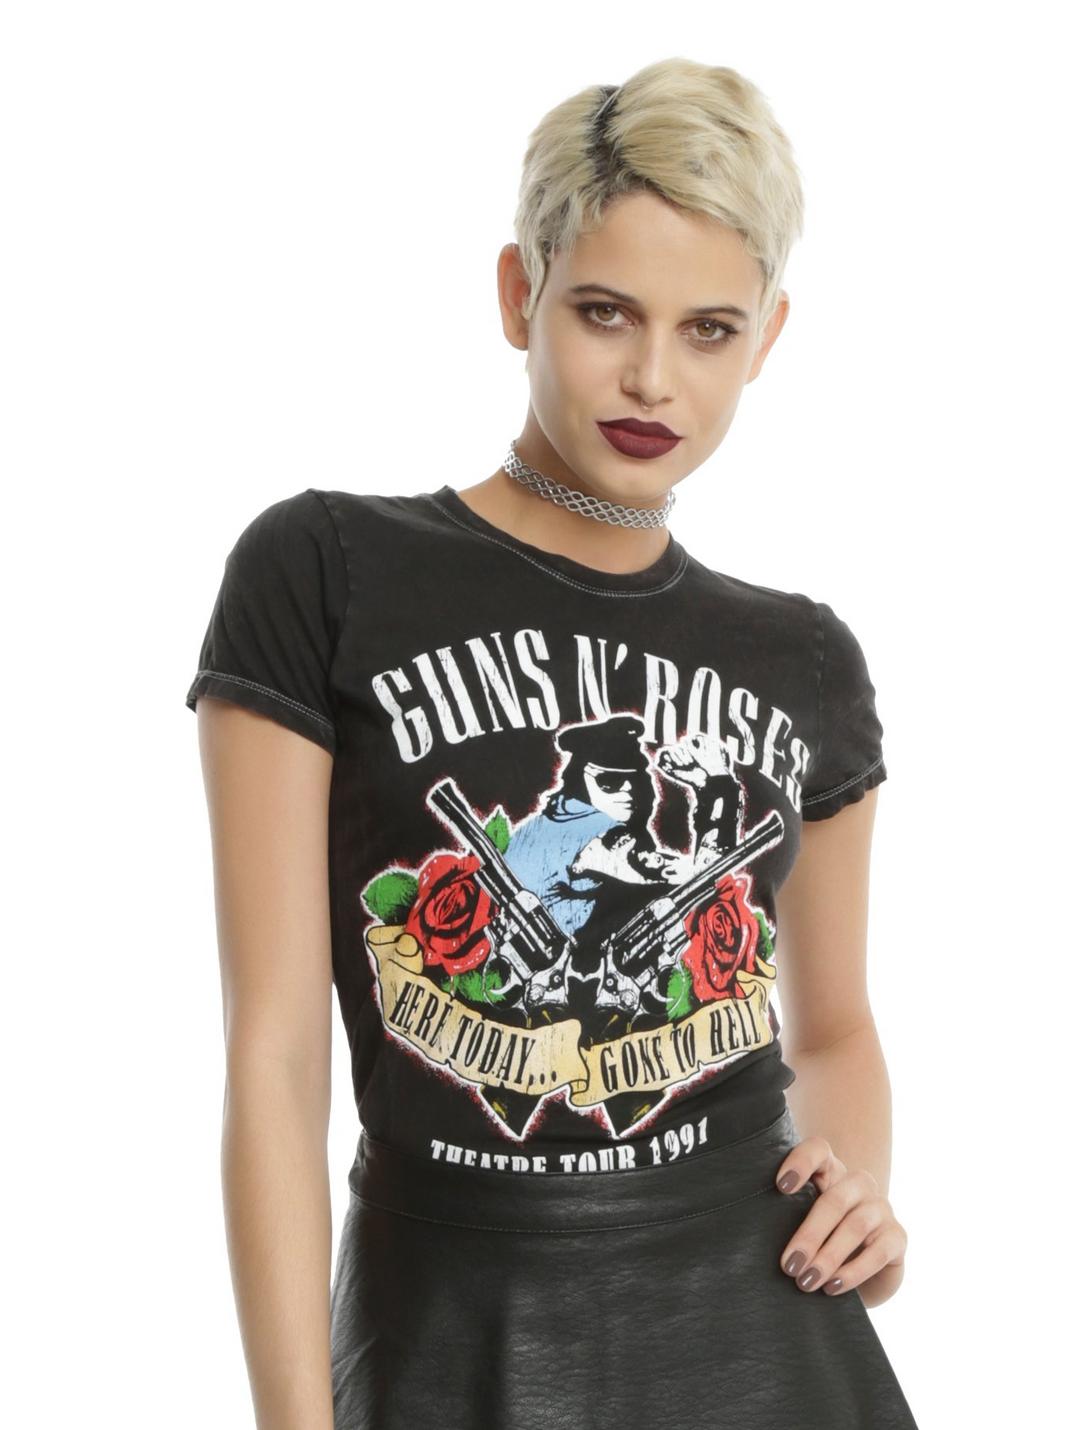 Guns N' Roses Here Today Gone To Hell Girls T-Shirt, BLACK, hi-res